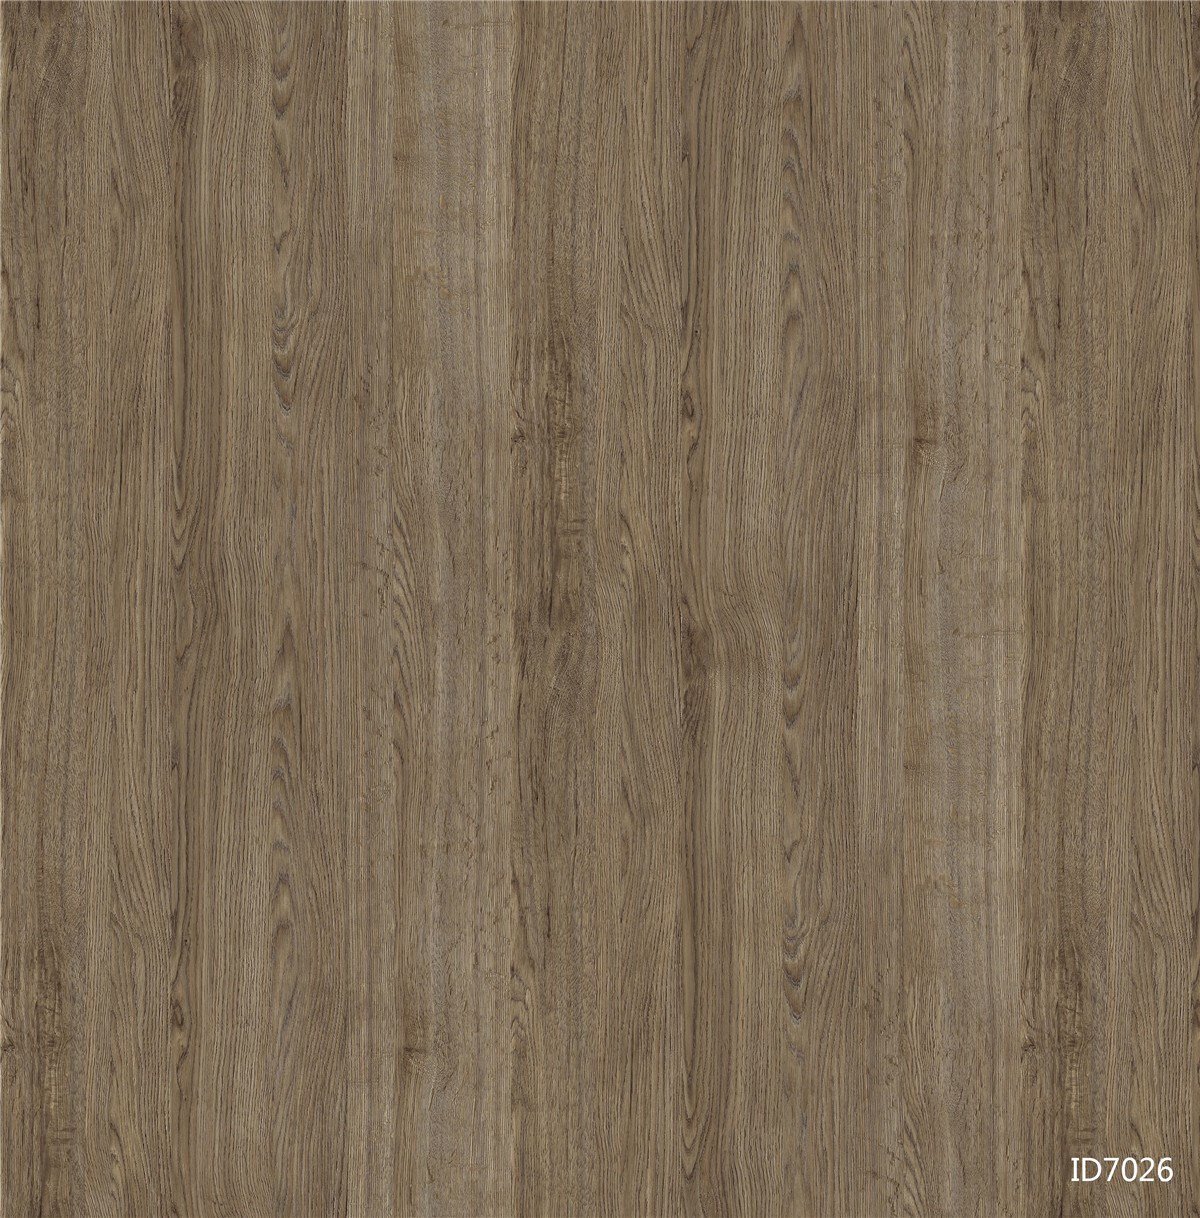 stable decorative paper laminate chestnut series for guest room-1